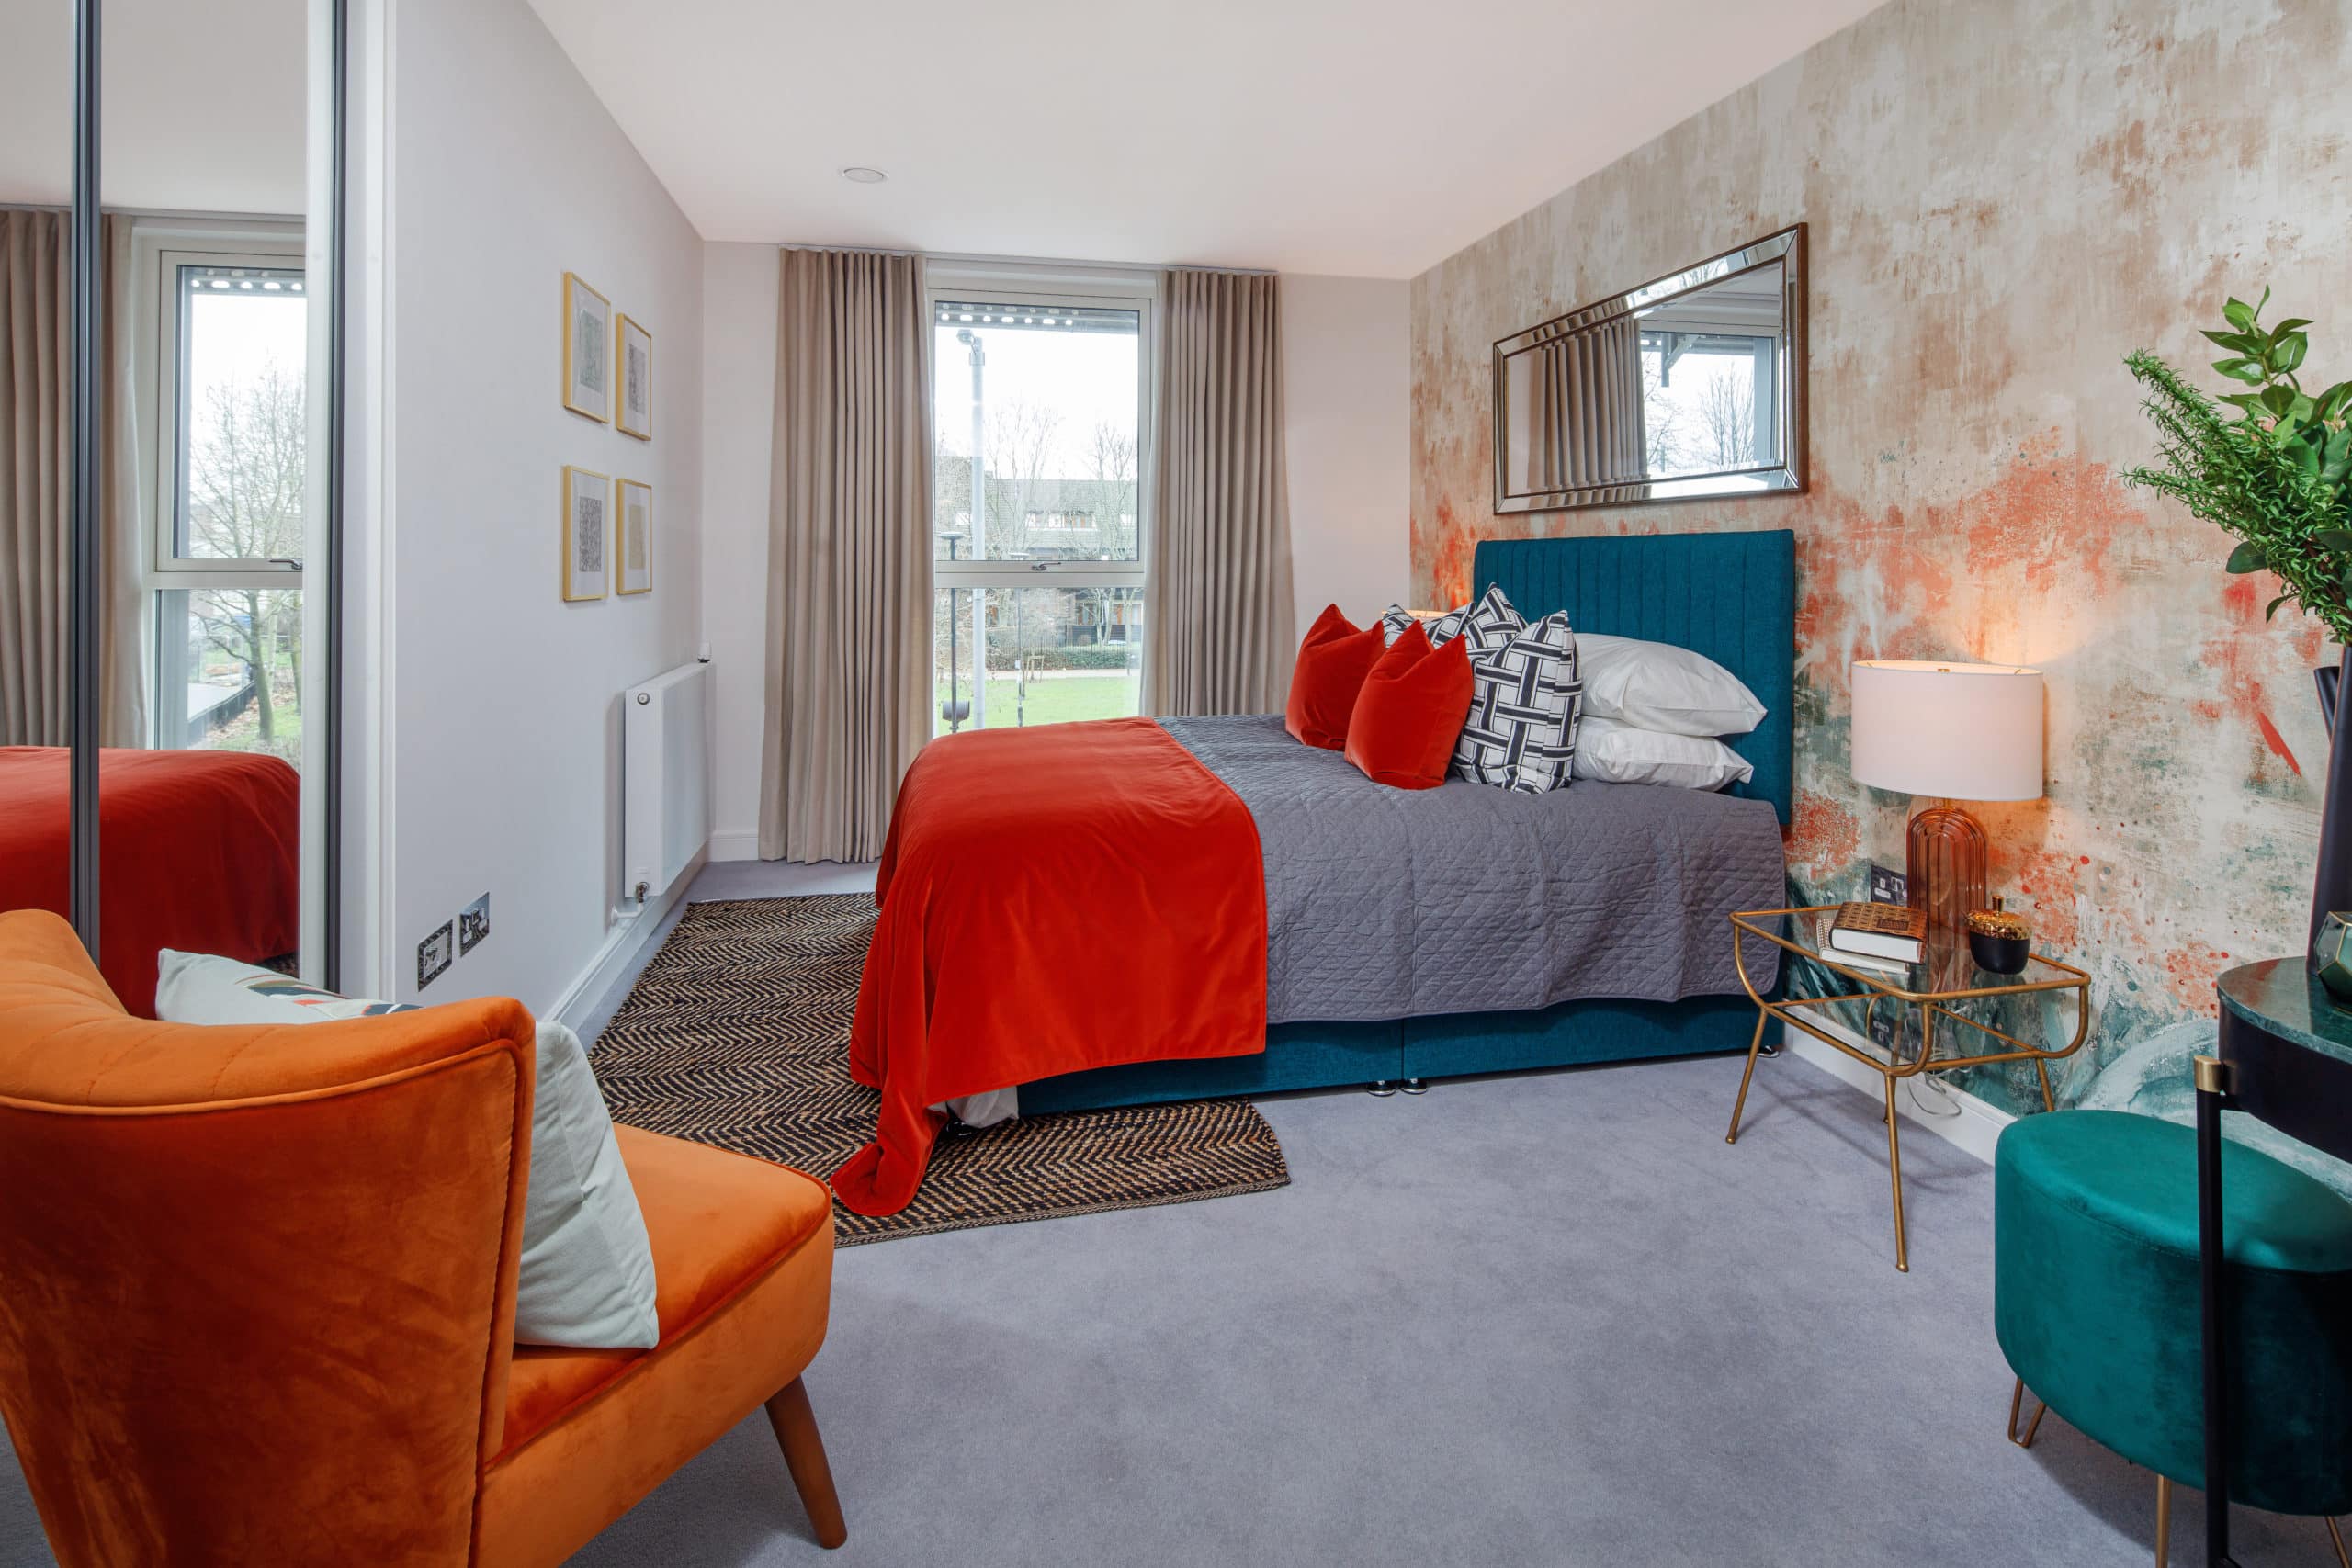 Bedroom at The Chain by L&Q - Shared Ownership & Help to Buy available on Share to Buy